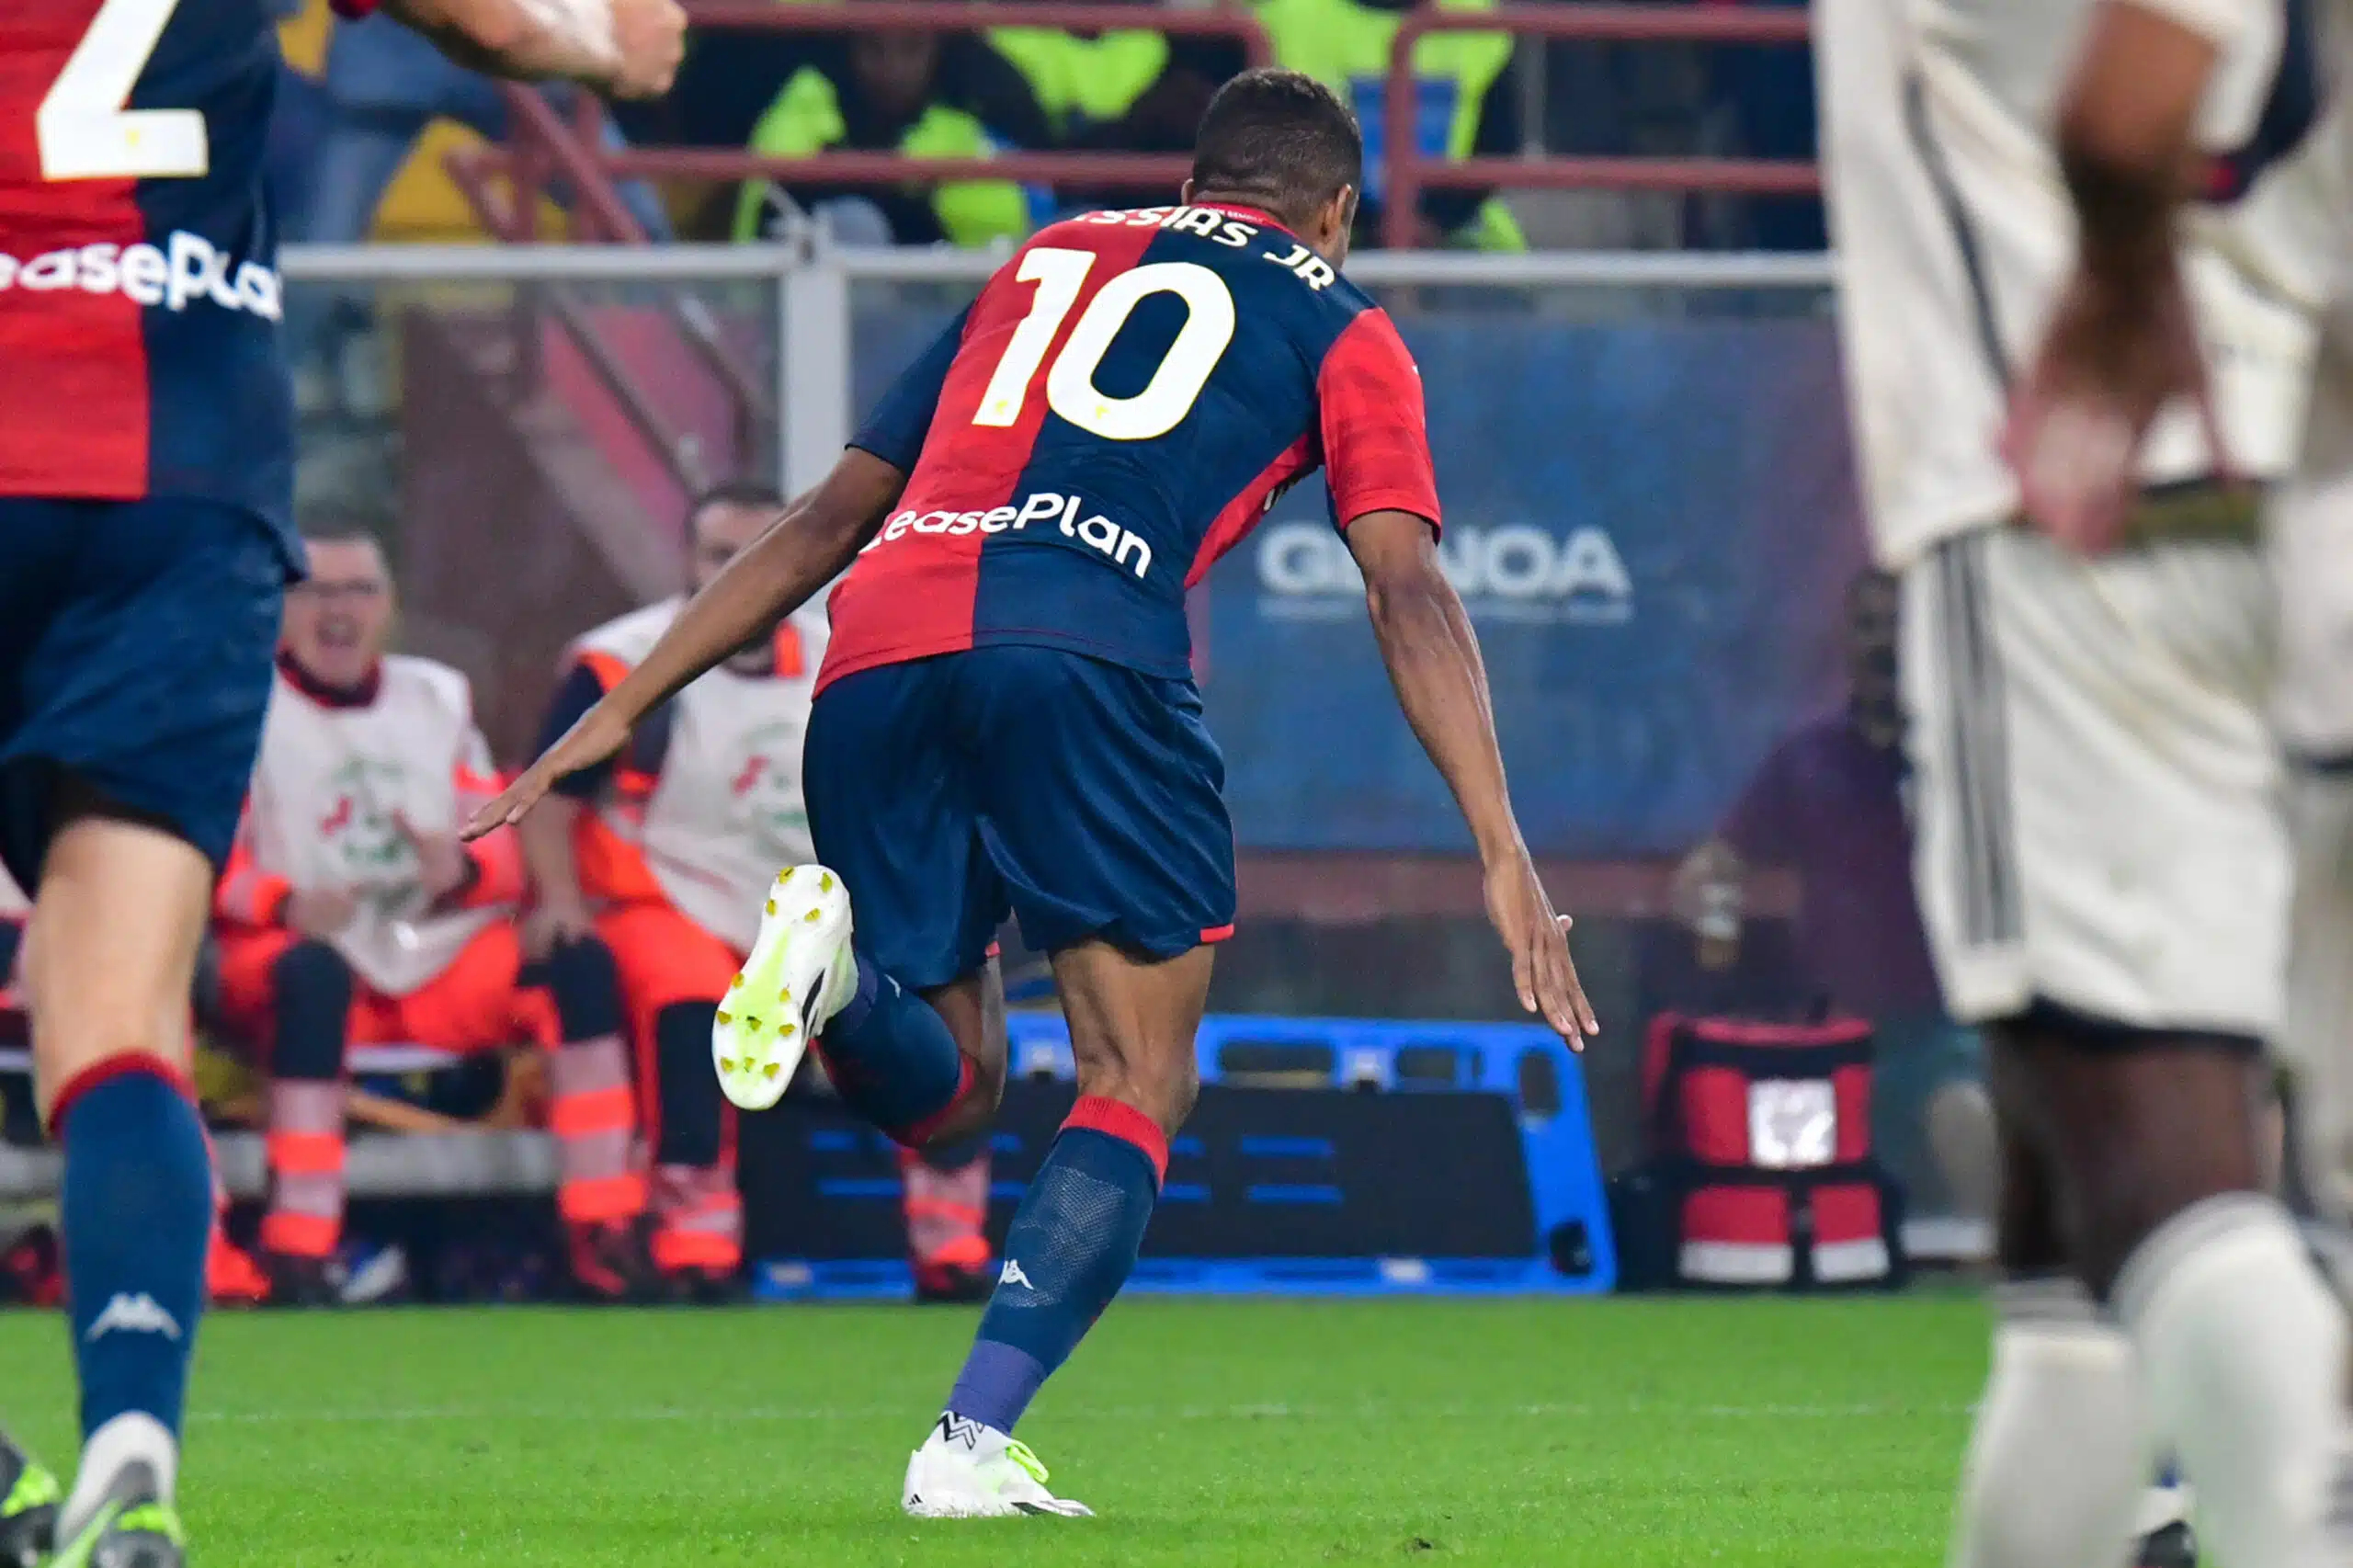 Genoa attacker Junior Messias lauds supporters after 4-1 win over Roma